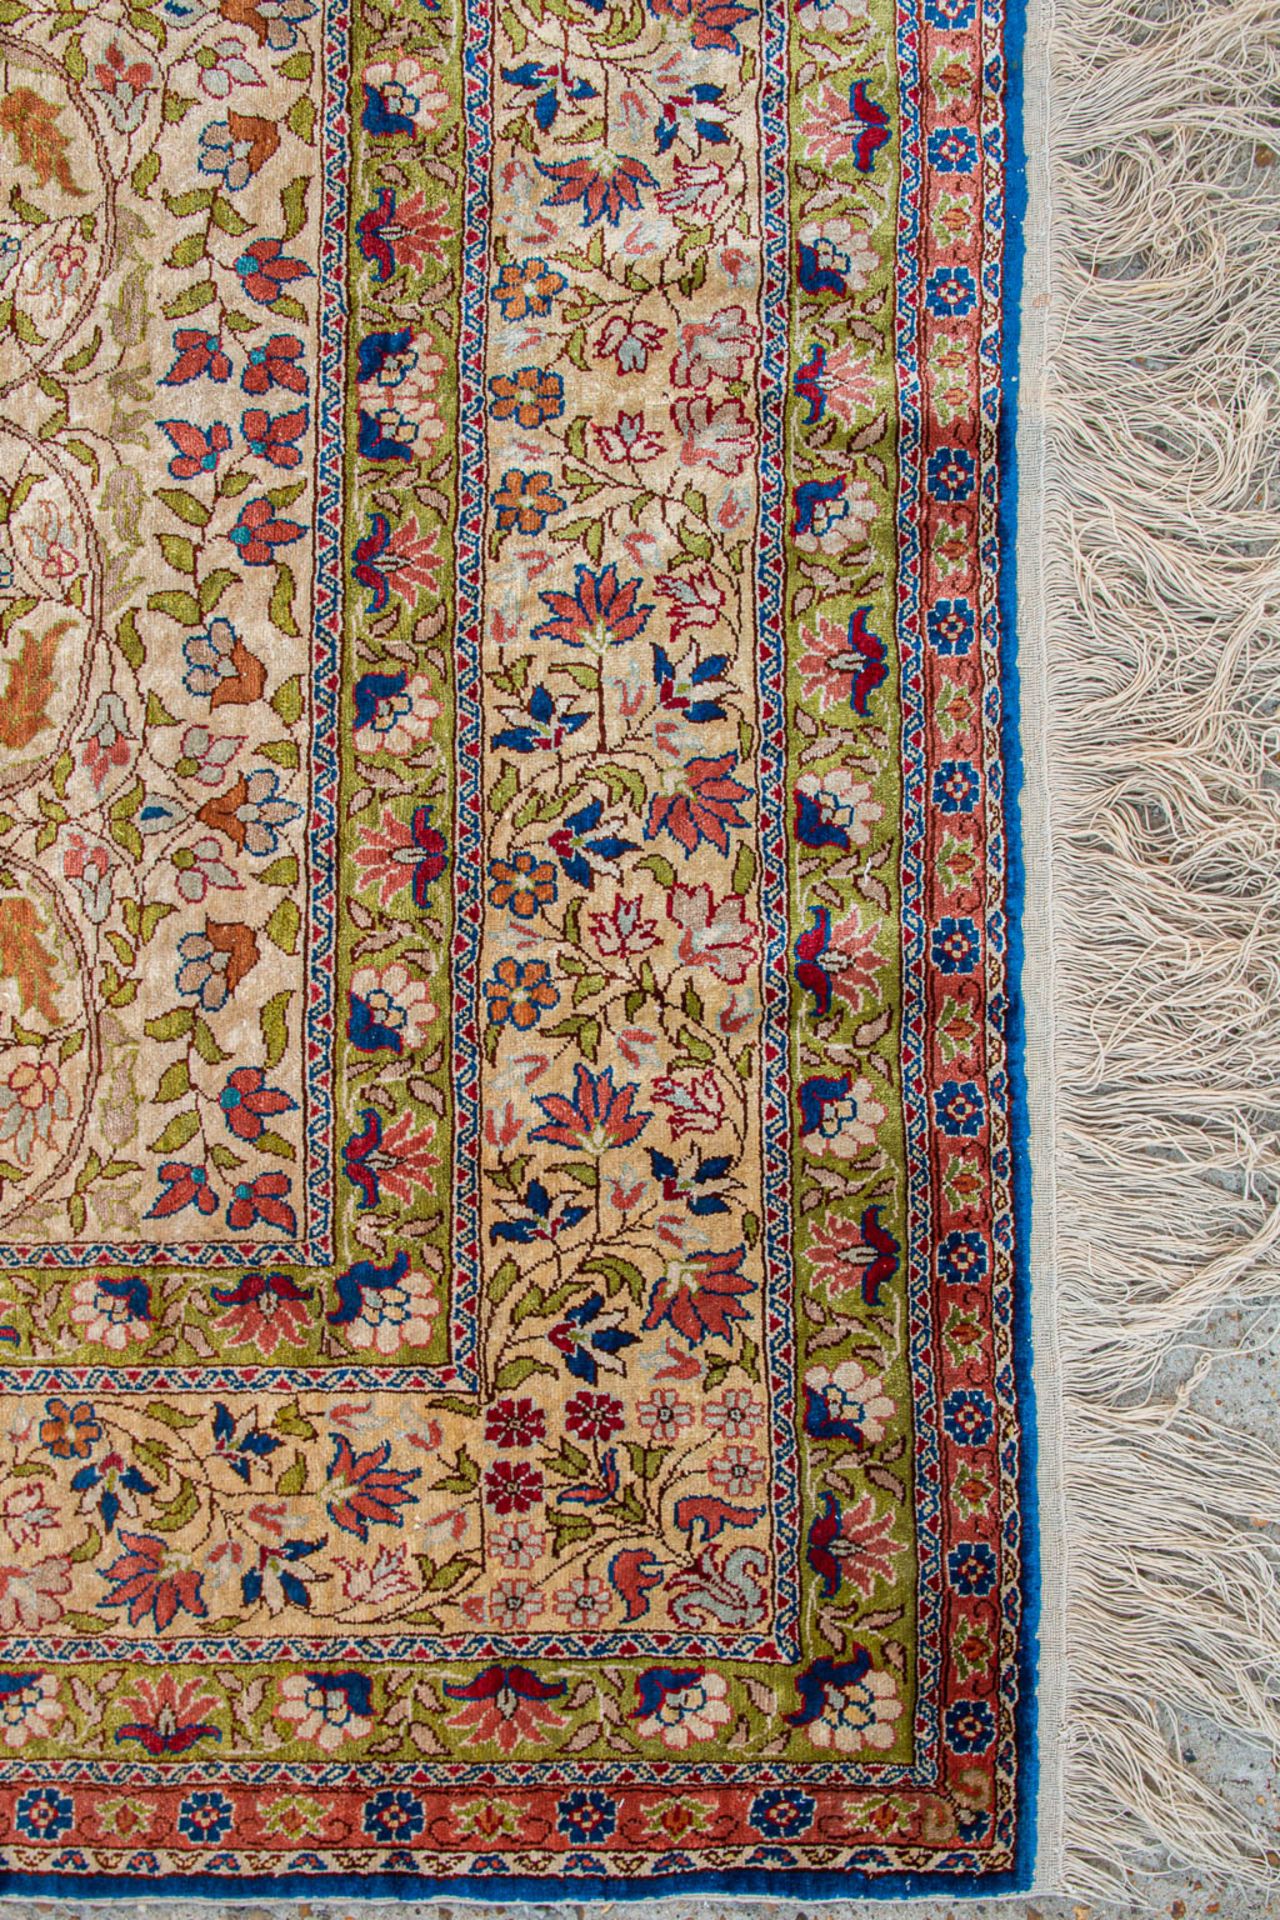 An Oriental hand-made carpet made of silk and marked Hereke (191 x 120) (120 x 190 cm) - Image 4 of 7